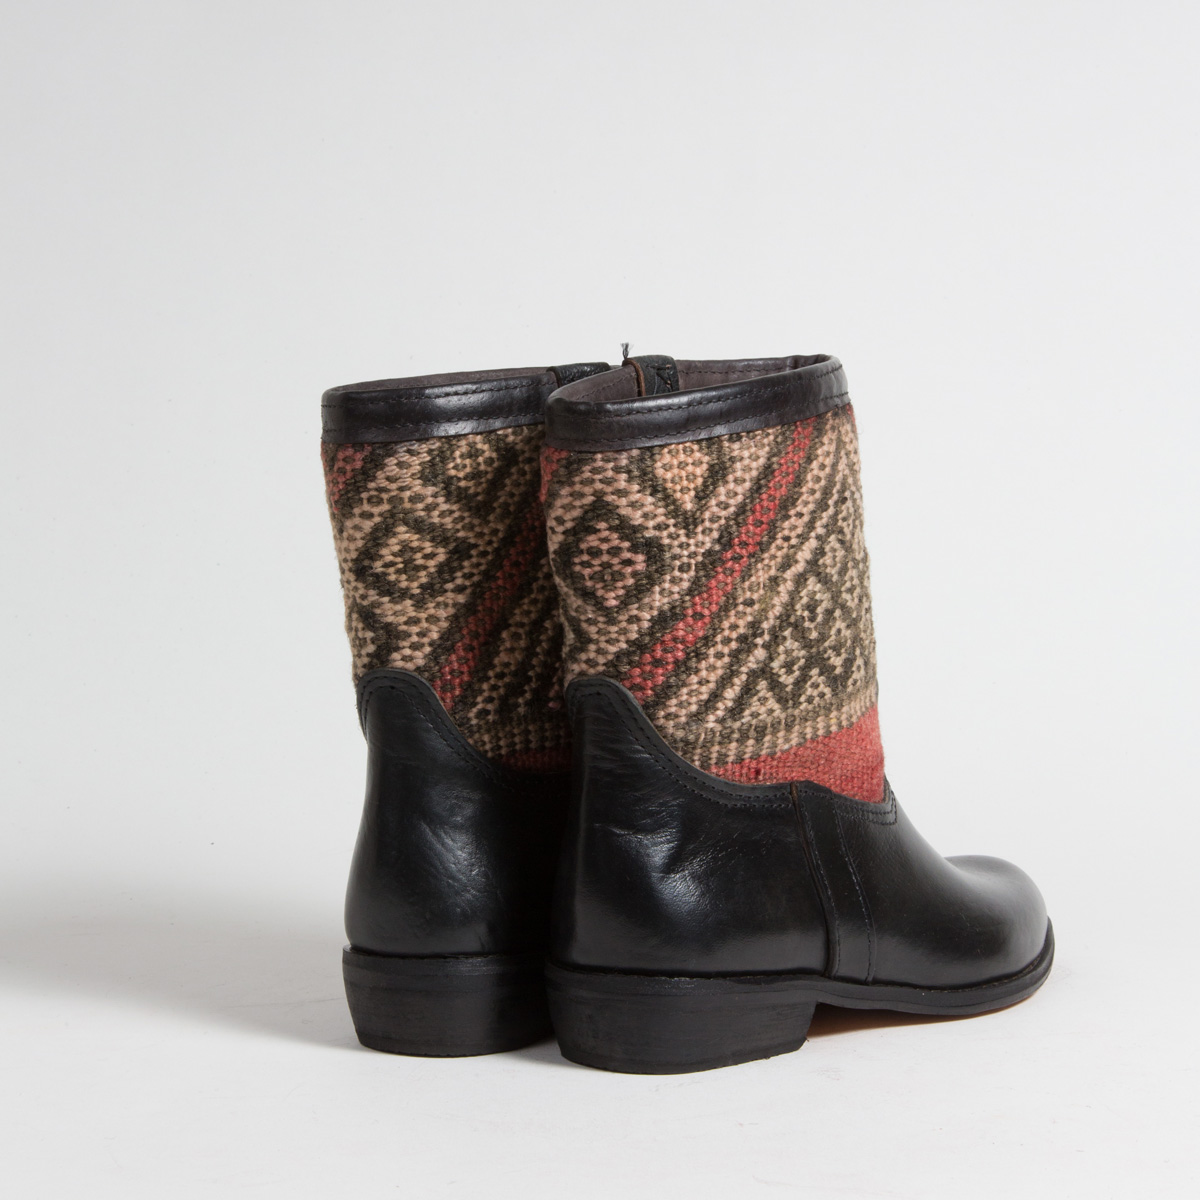 Bottines Kilim cuir mababouche artisanales (Réf. RPN20-40)